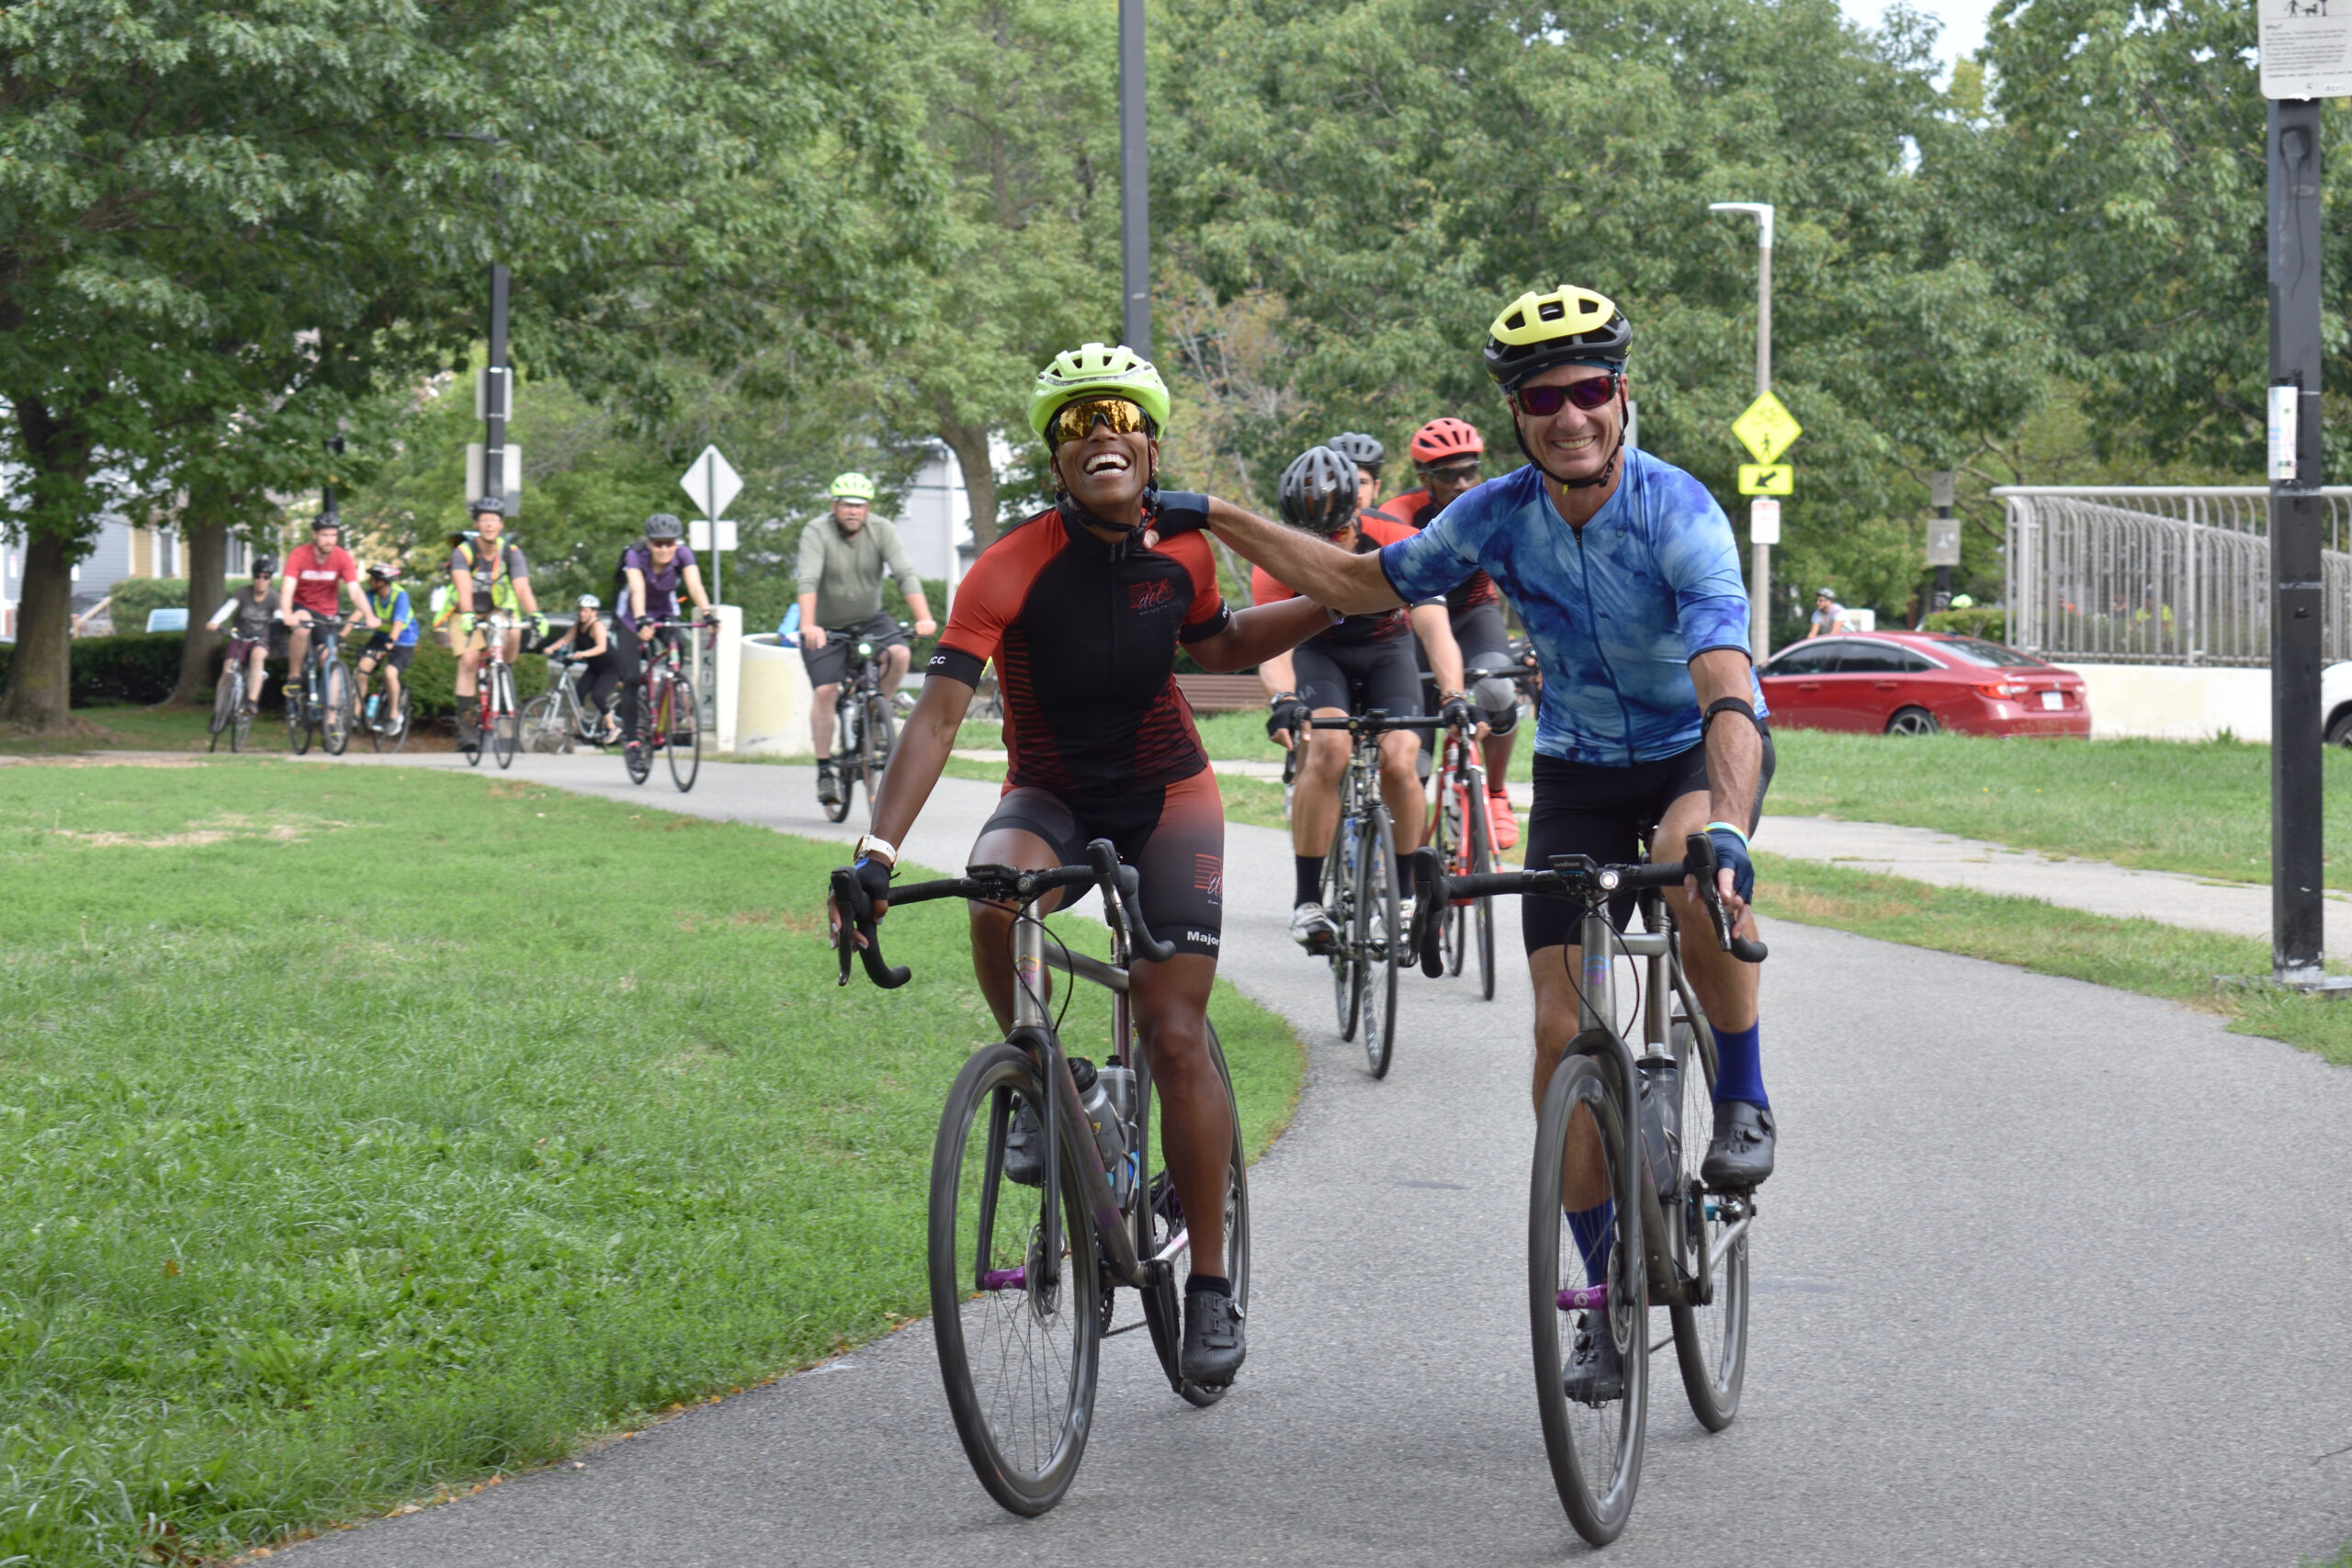 Two cyclists link hands while riding their bikes and smiling.